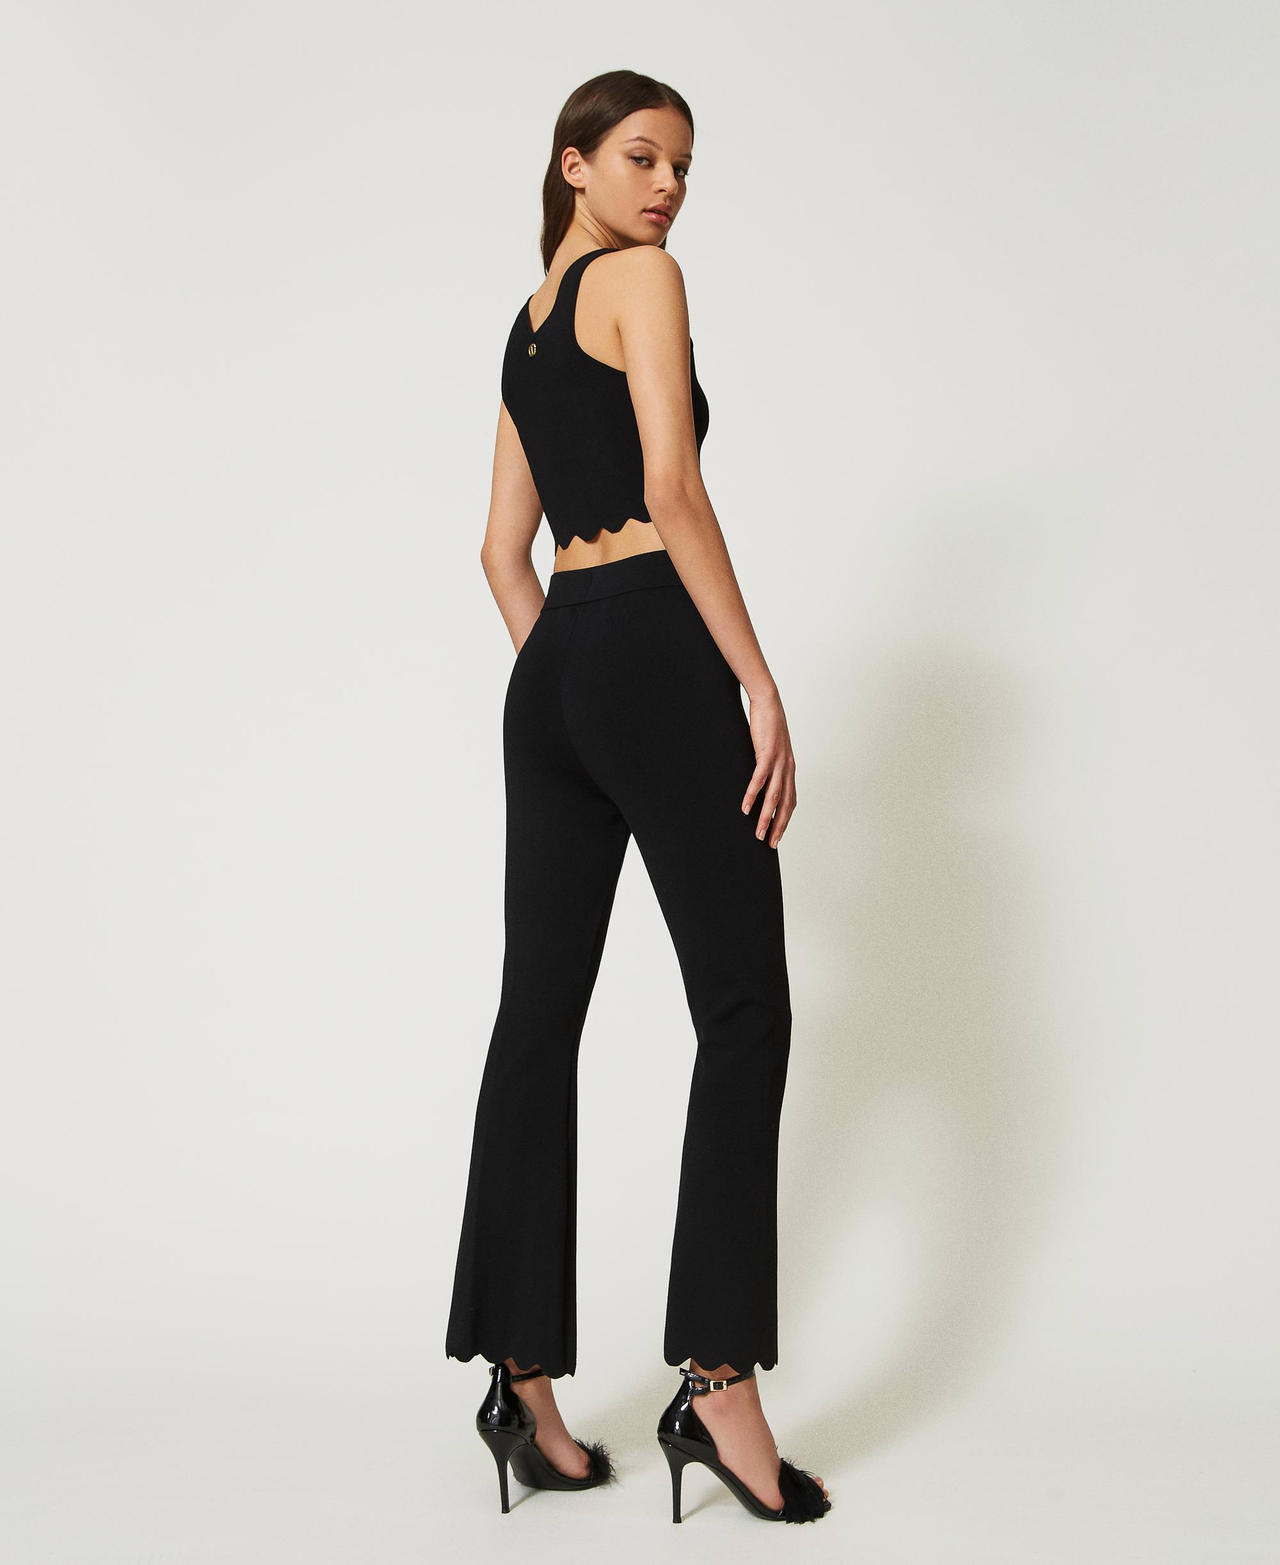 High Waisted Flared Trousers in Black Crepe Ready To Ship  Black school  trousers, High waisted flares, Flare trousers